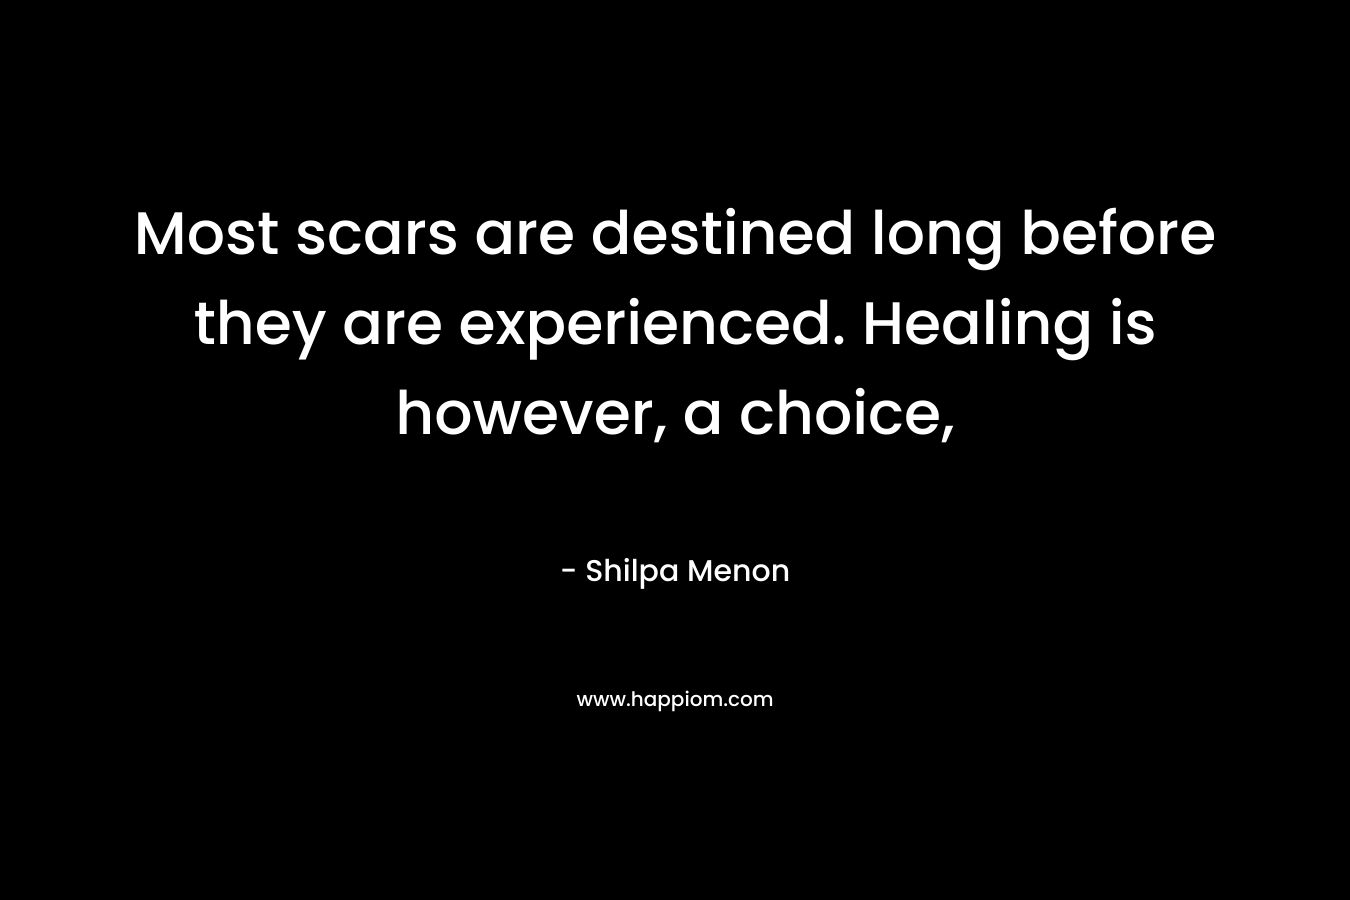 Most scars are destined long before they are experienced. Healing is however, a choice, – Shilpa Menon